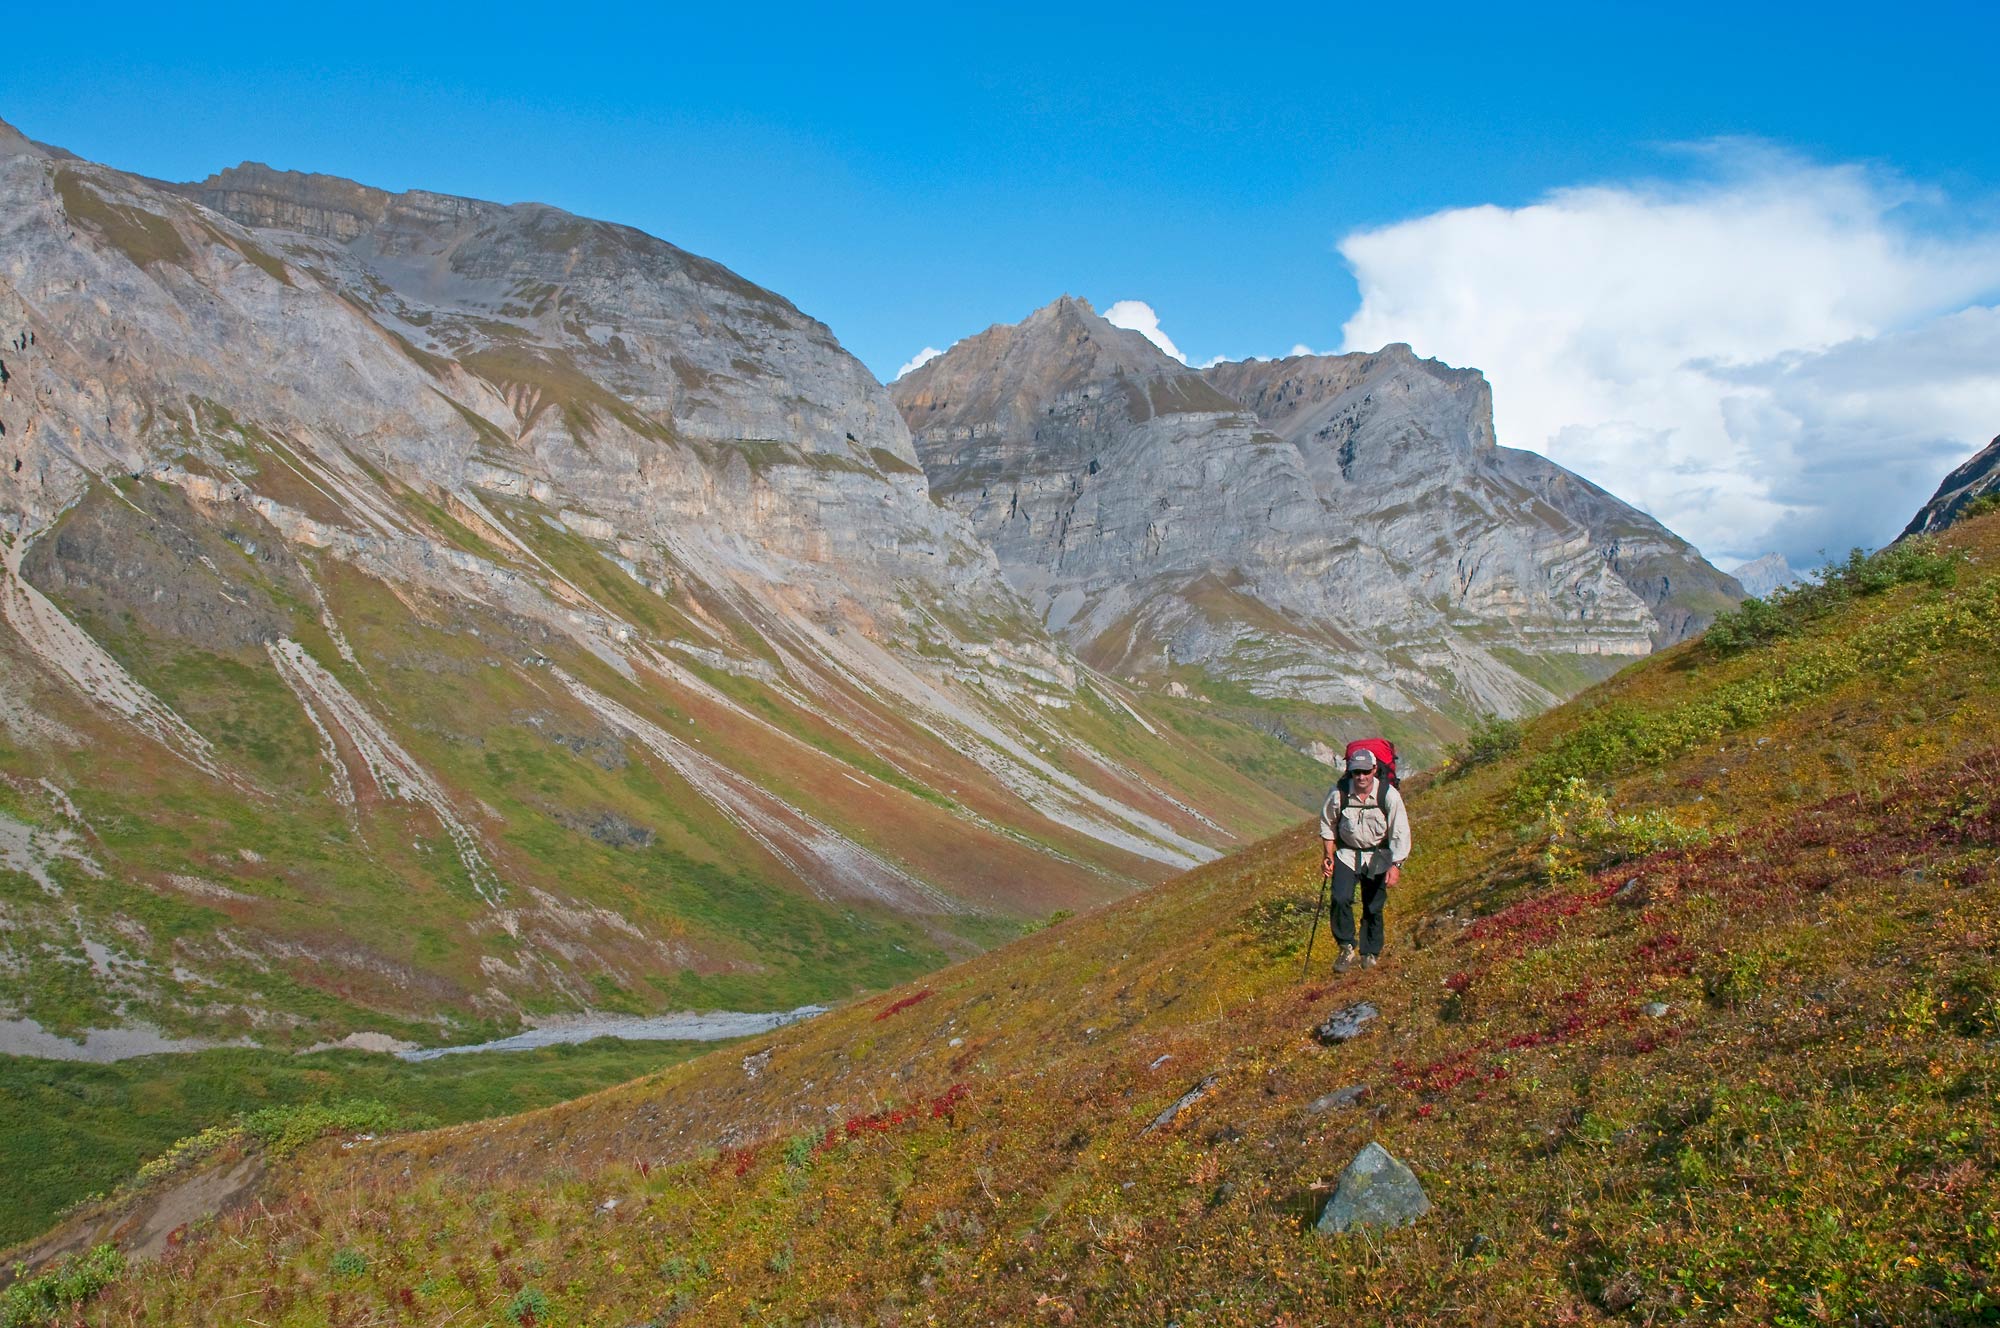 A backpacker hikes up the valley of Hidden Creek, in the Wrangell Mountains. Fall colors glow on the tundra. Wrangell-St. Elias National Park and Preserve, Alaska.